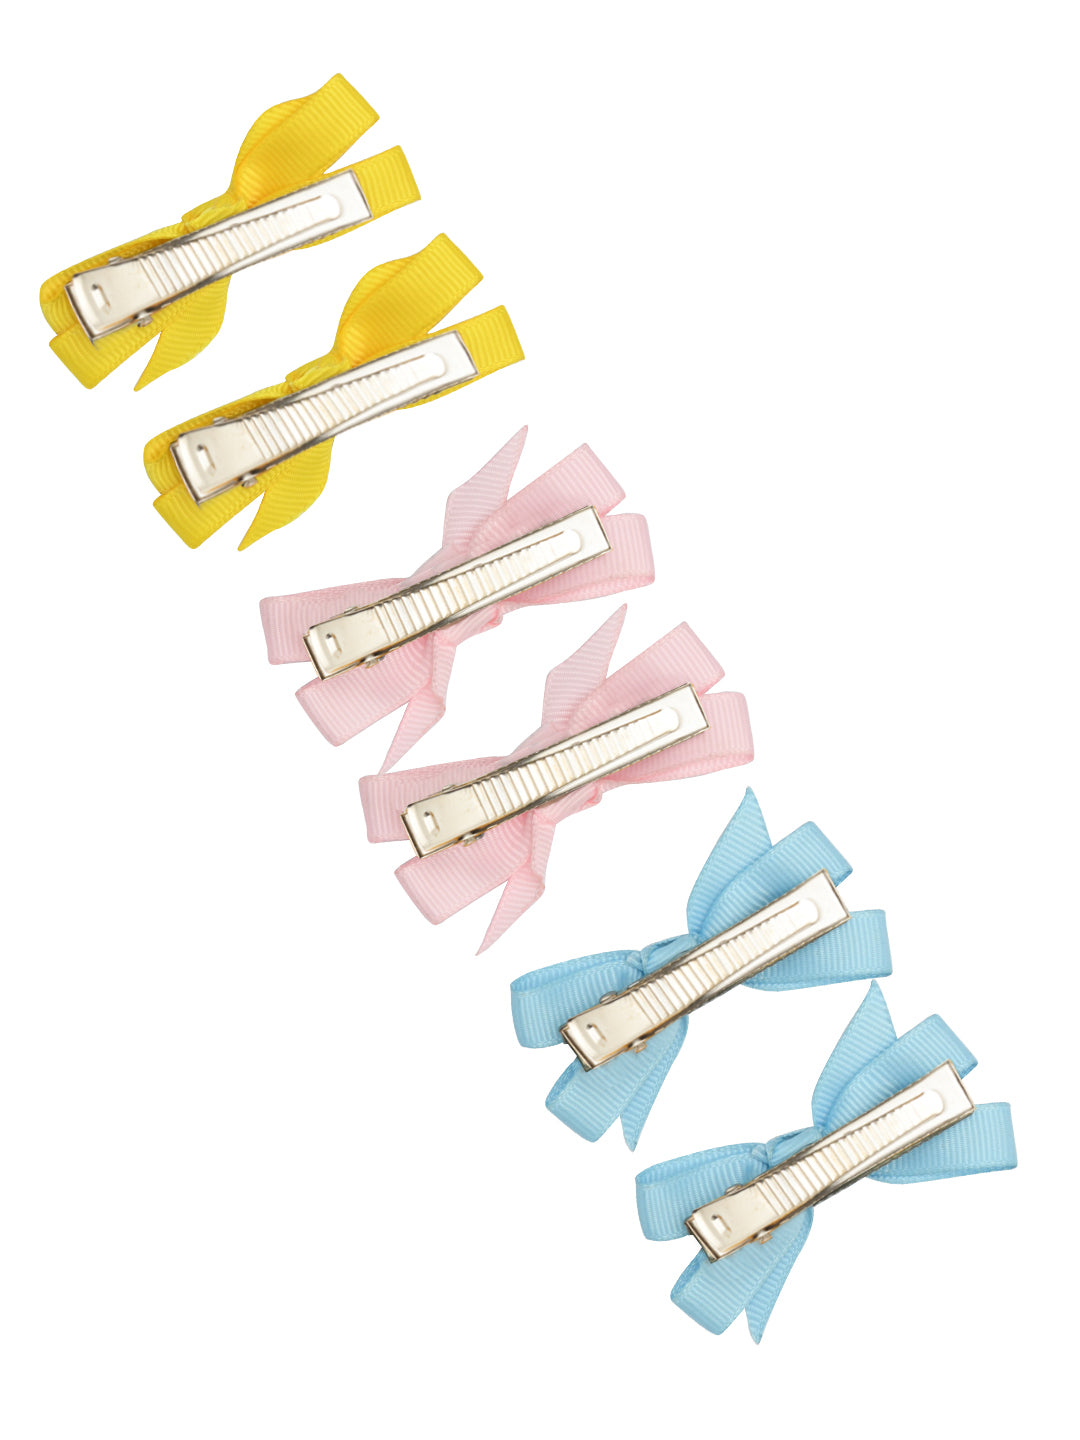 Set of 6 Multicolor Bow Hair Clips for Girls